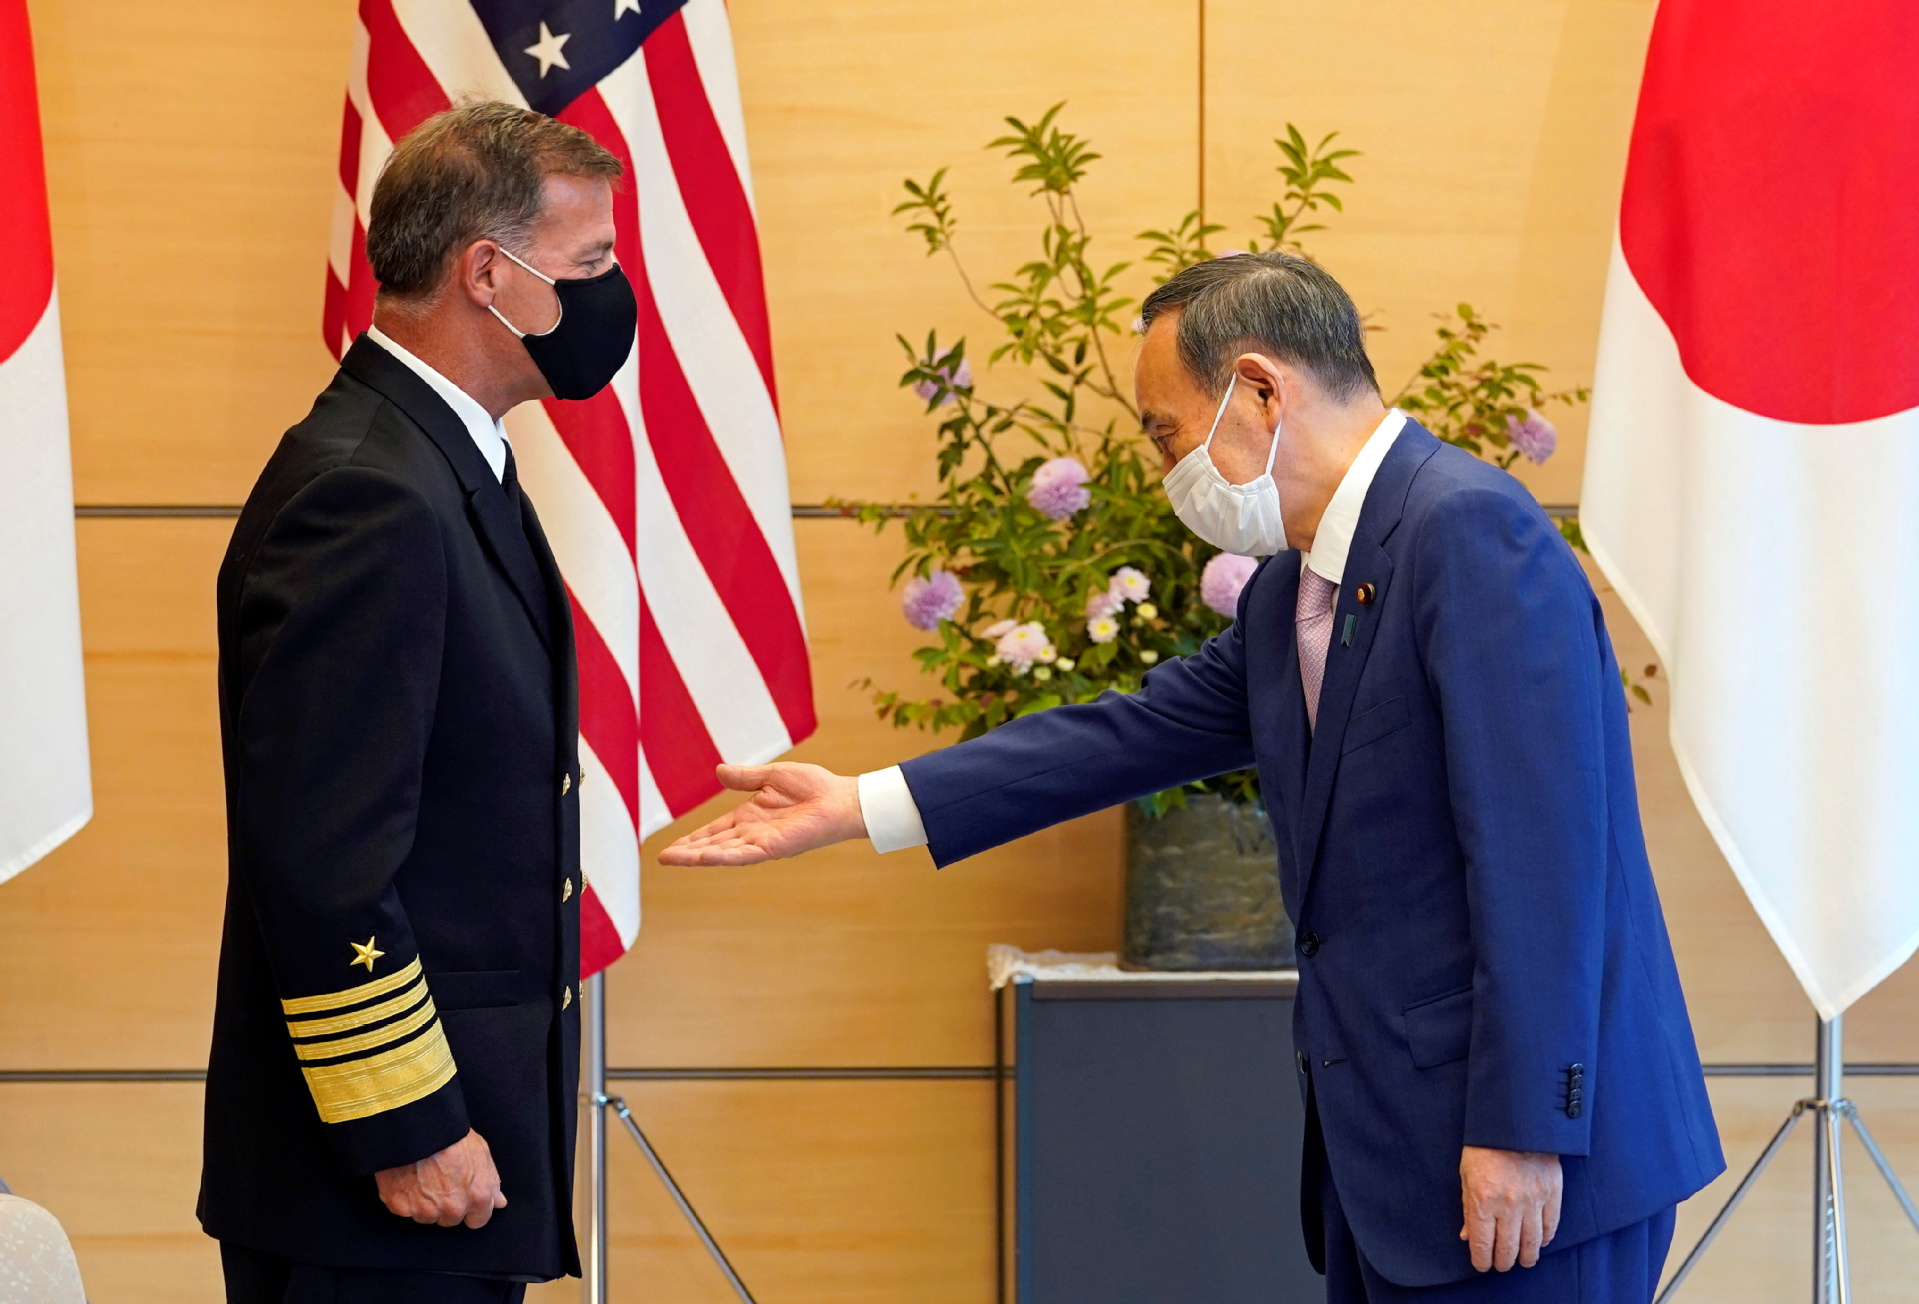 Admiral John C. Aquilino (L), Commander of the United States Indo-Pacific Command, is welcomed by Japanese Prime Minister Yoshihide Suga at the start of their meeting at the prime minister's official residence in Tokyo, Japan, on June 1, 2021. [Photo/Agencies]